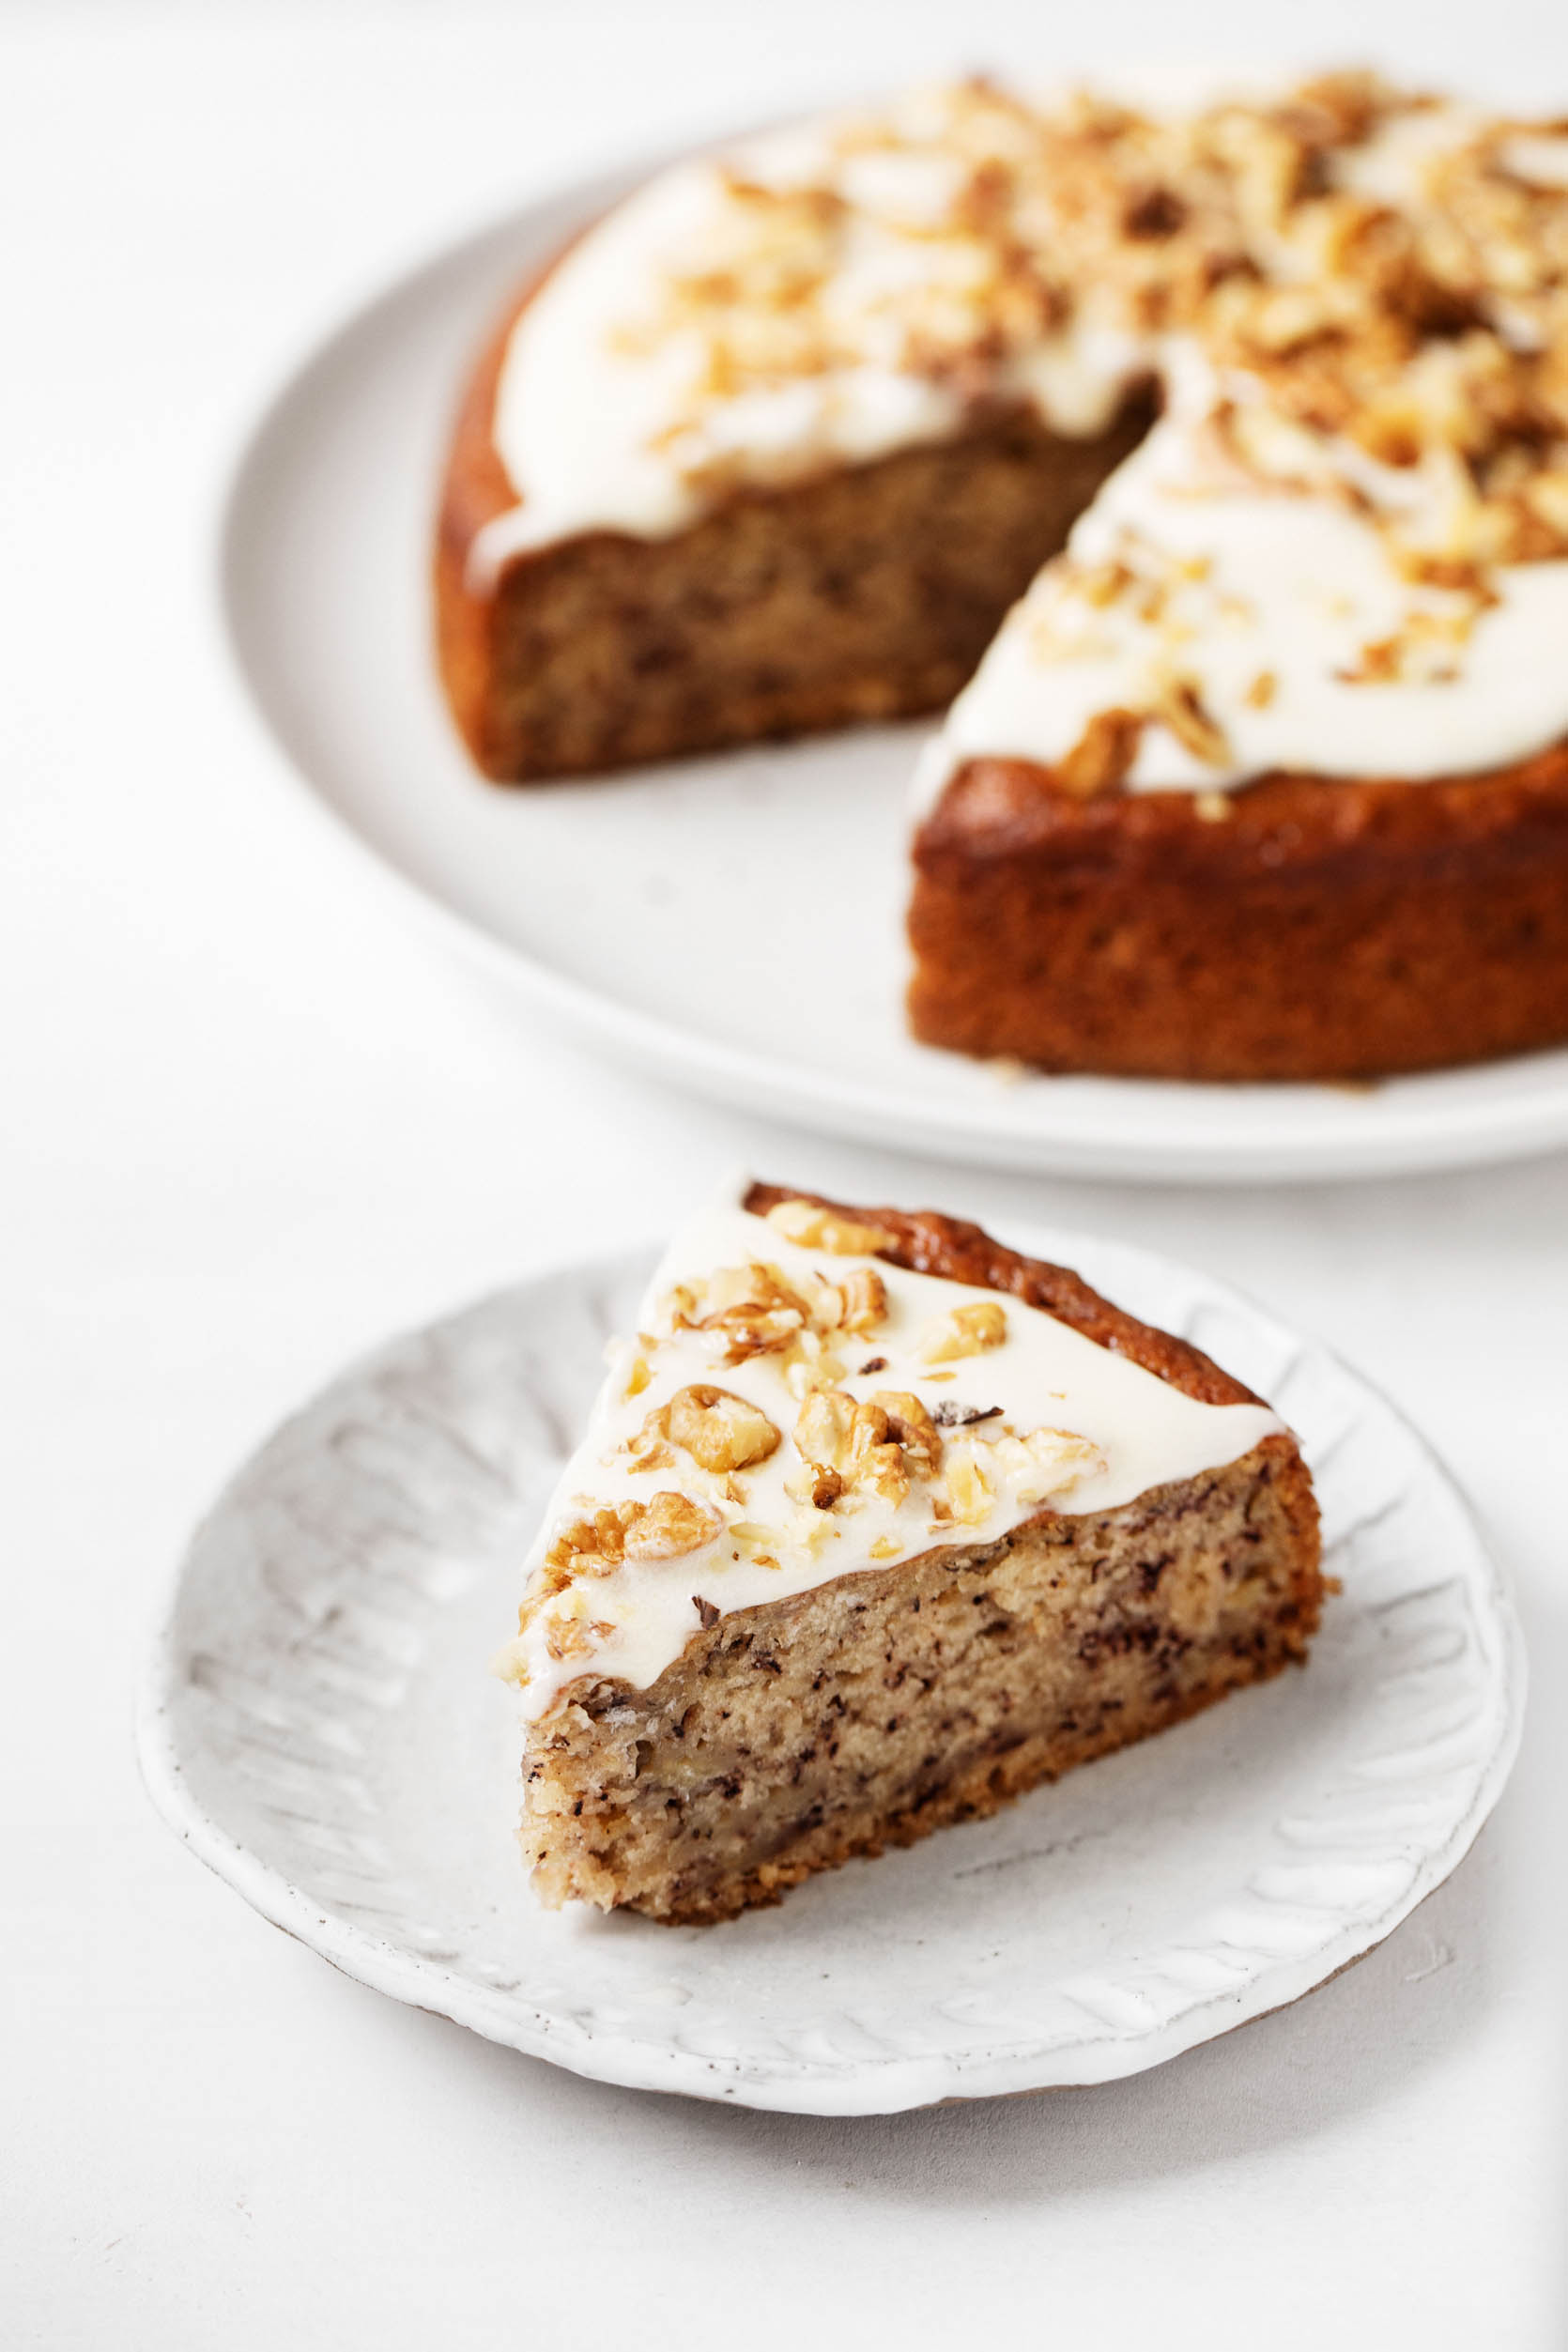 A beautiful, freshly cut slice of vegan banana cake rests on a small dessert plate, decorated with frosting and chopped nuts.